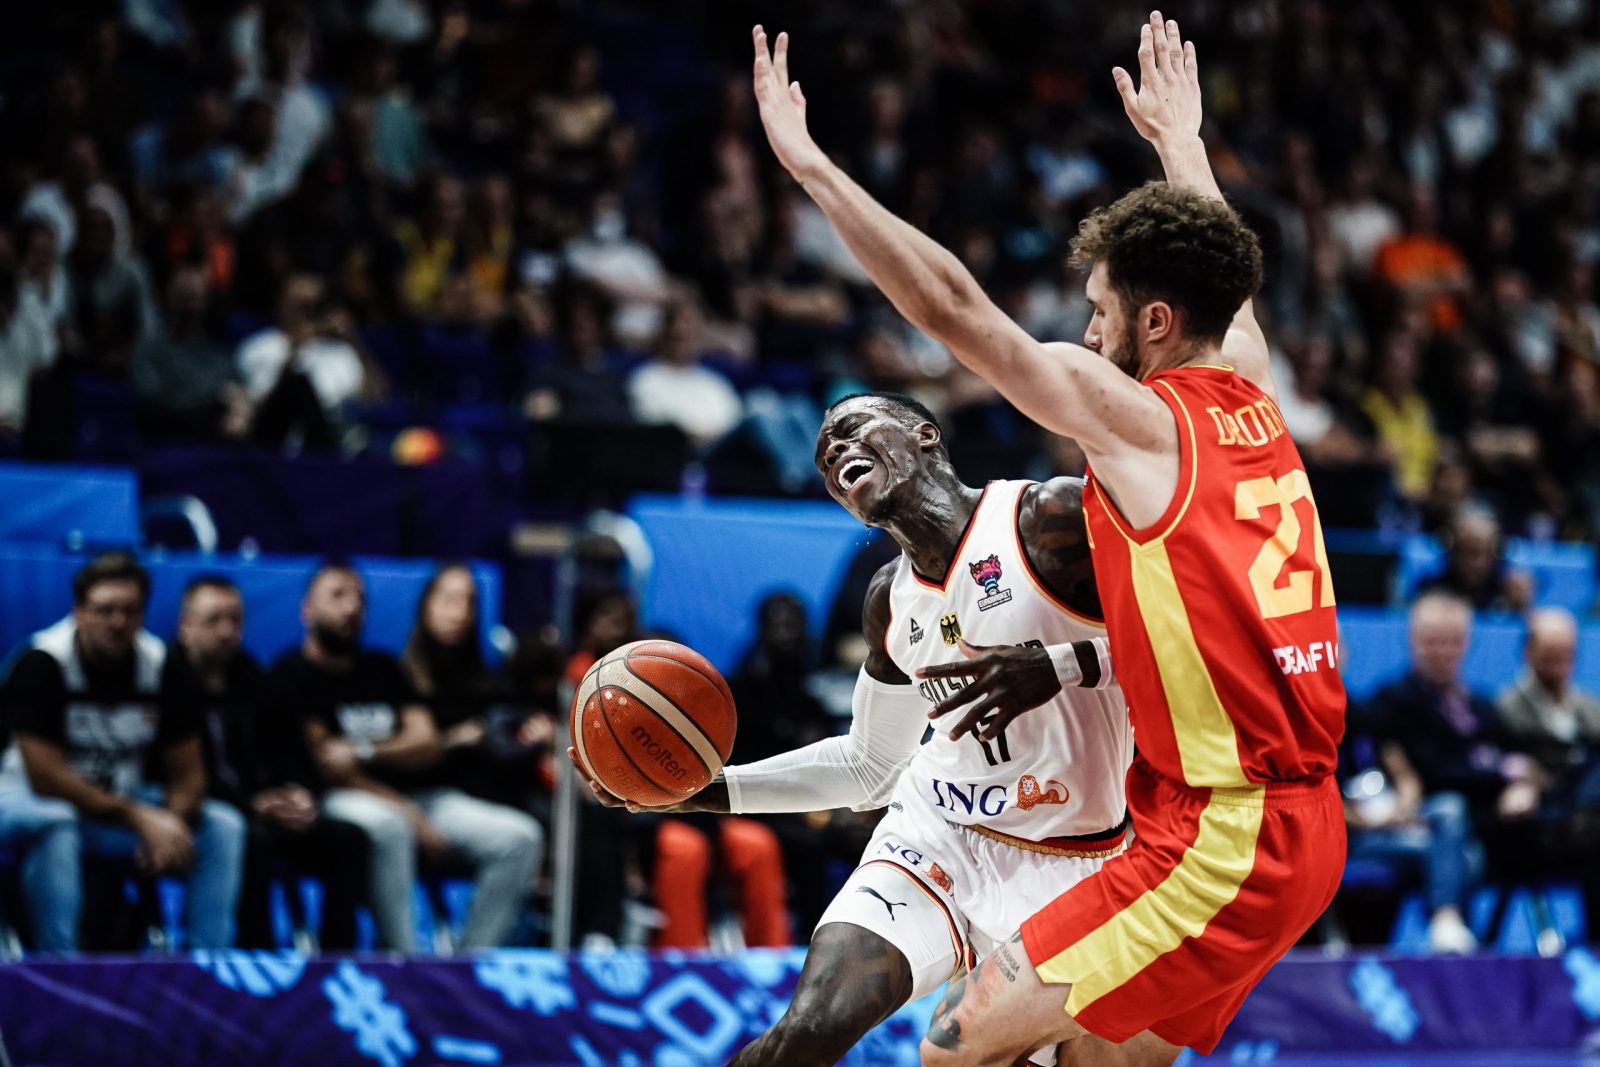 epa10175894 Germany's Dennis Schroeder (L) in action against Montenegro's Igor Drobnjak (R) during the FIBA EuroBasket 2022 round of 16 match between Germany and Montenegro at EuroBasket Arena in Berlin, Germany, 10 September 2022.  EPA/CLEMENS BILAN